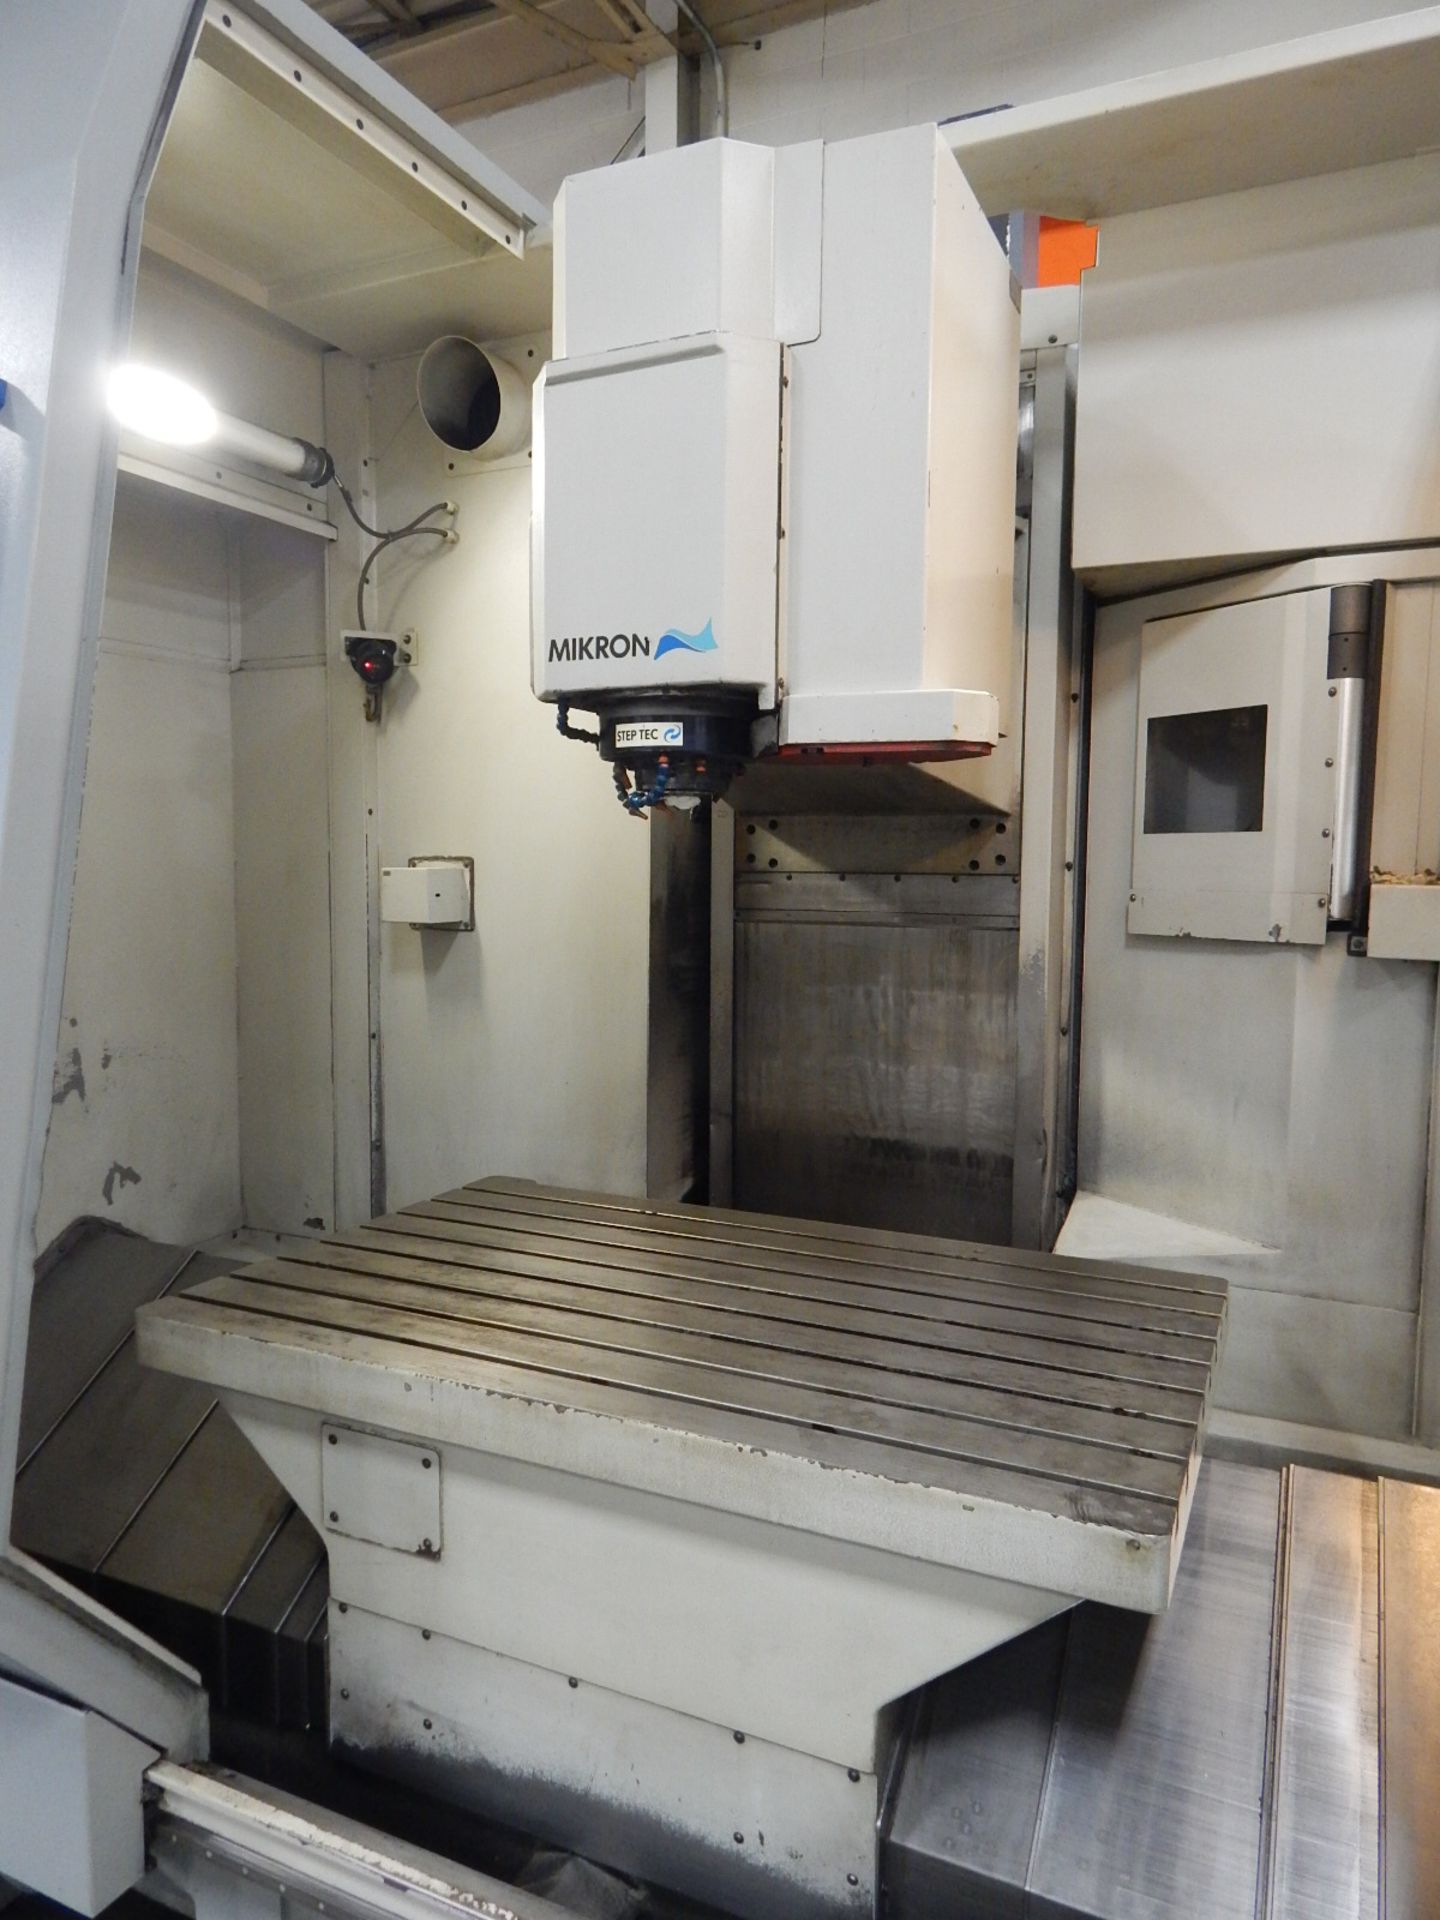 MIKRON (2003) VCP1350 HIGH SPEED CNC VERTICAL MACHINING CENTER WITH HEIDENHAIN ITNC CNC CONTROL, - Image 5 of 7